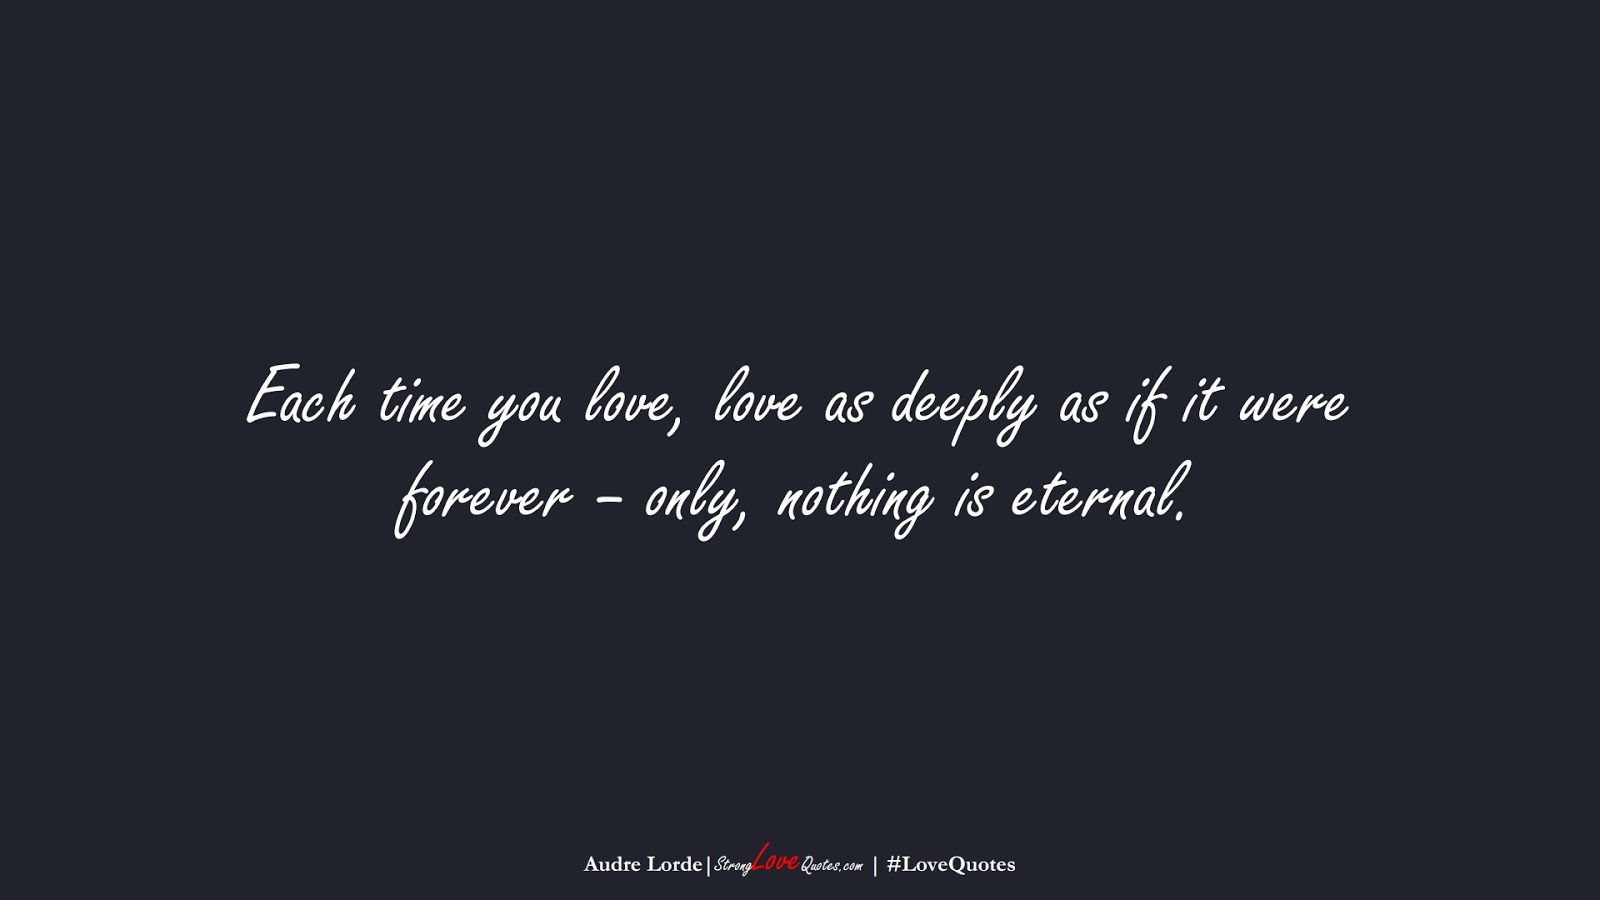 Each time you love, love as deeply as if it were forever – only, nothing is eternal. (Audre Lorde);  #LoveQuotes